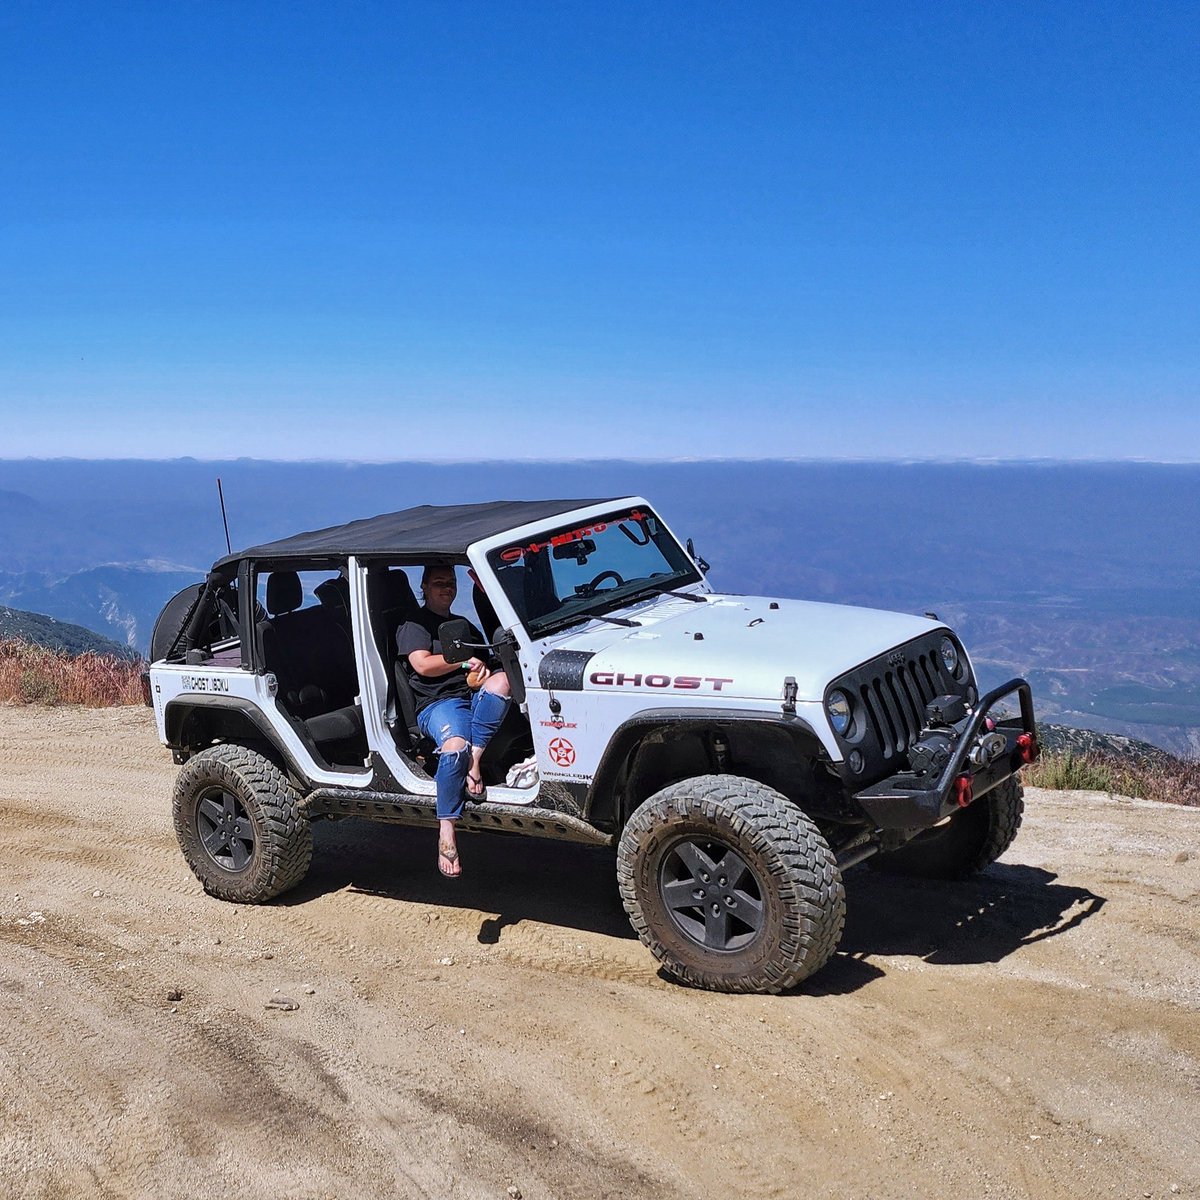 Now that's a view......

..... the background view is pretty cool too I guess! 😆

#Jeep #Jeepers #JeepWave #JeepLife #NittoTires #OffRoad #Adventures #SoCal

_OIIIIIIIO_
@Jeep | @THEJeepMafia | @NittoTire | @Pennzoil | @2fingeredsocie1